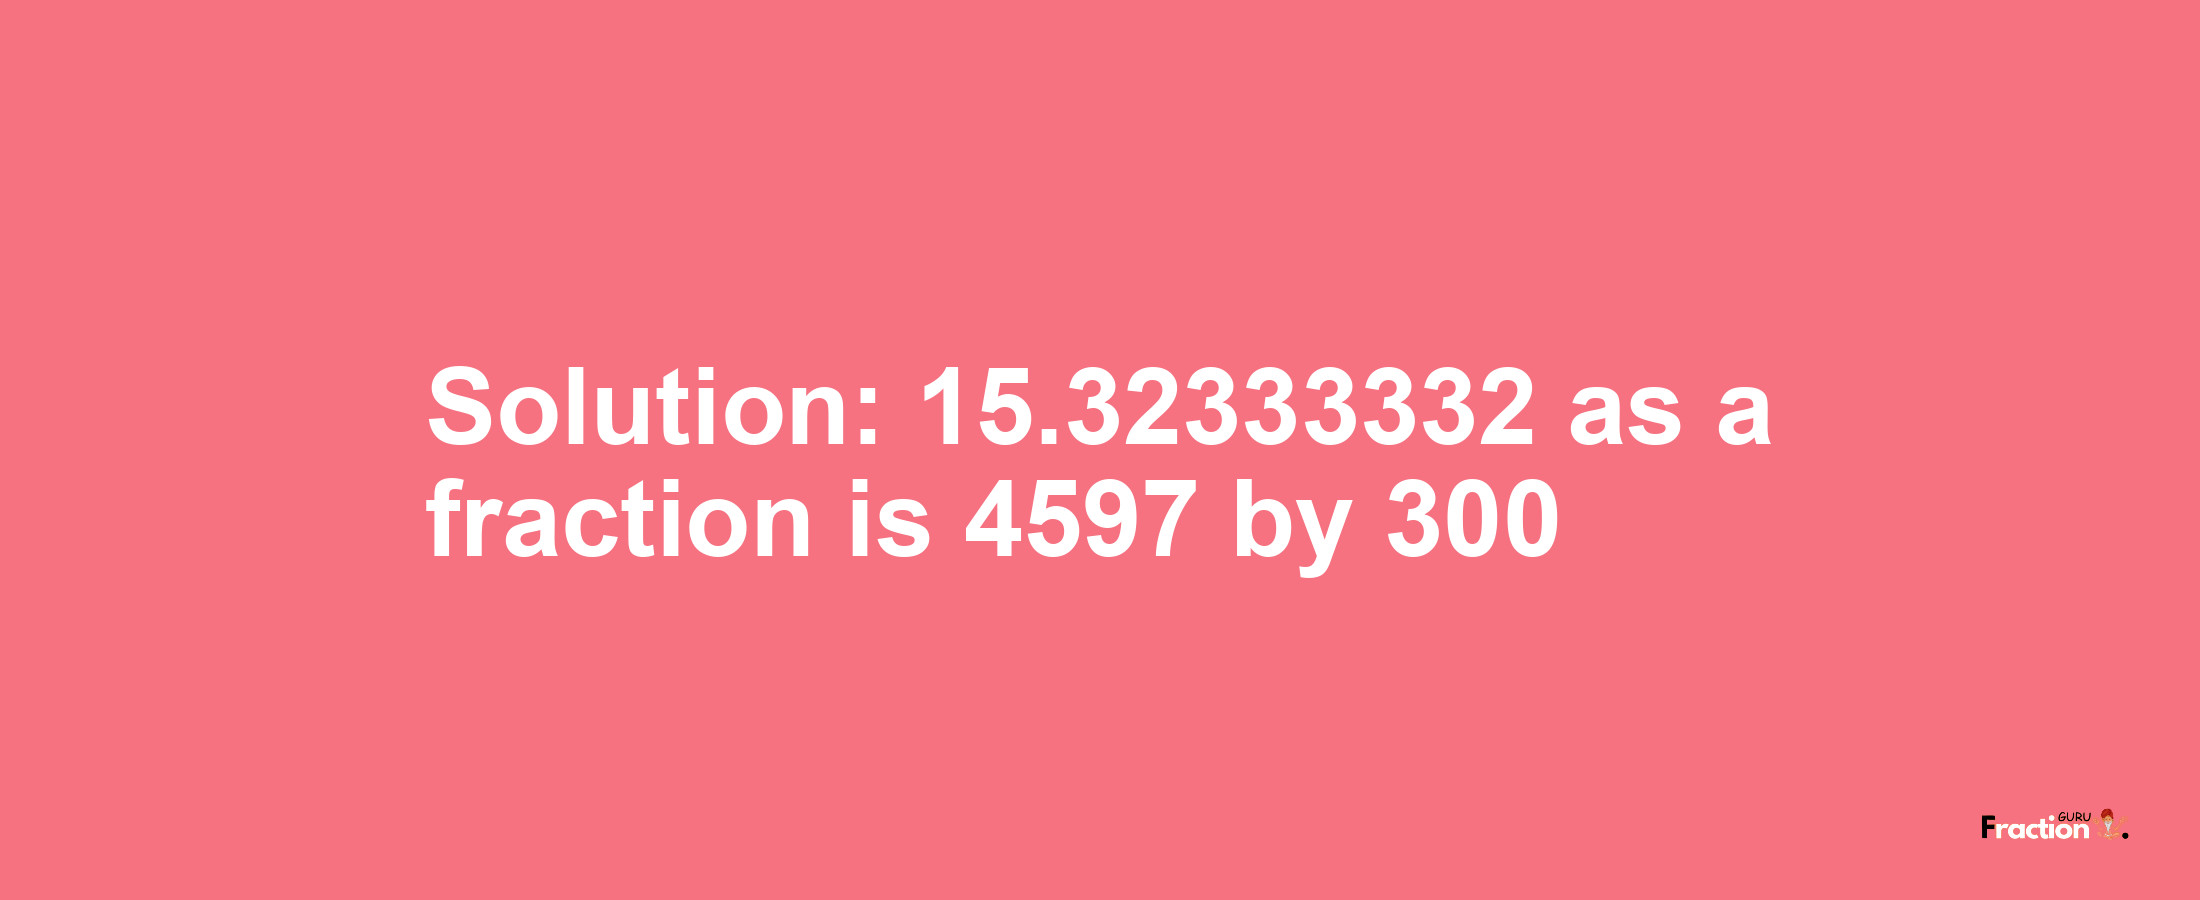 Solution:15.32333332 as a fraction is 4597/300